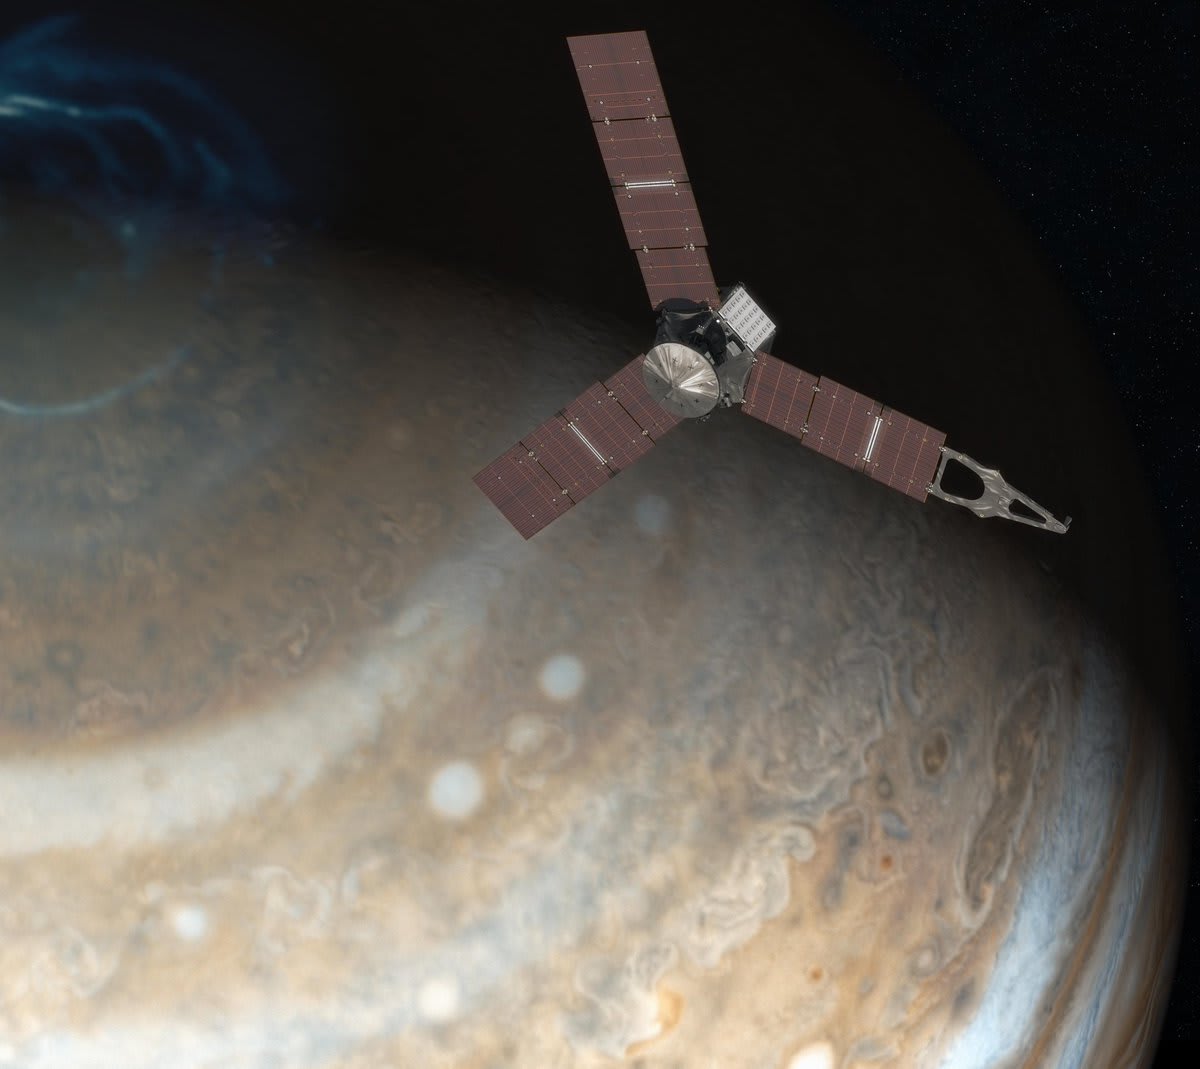 10 years ago today, the Juno spacecraft launched to Jupiter on a mission to reveal the origin and evolution of the gas giant and peak beneath its swirling clouds: